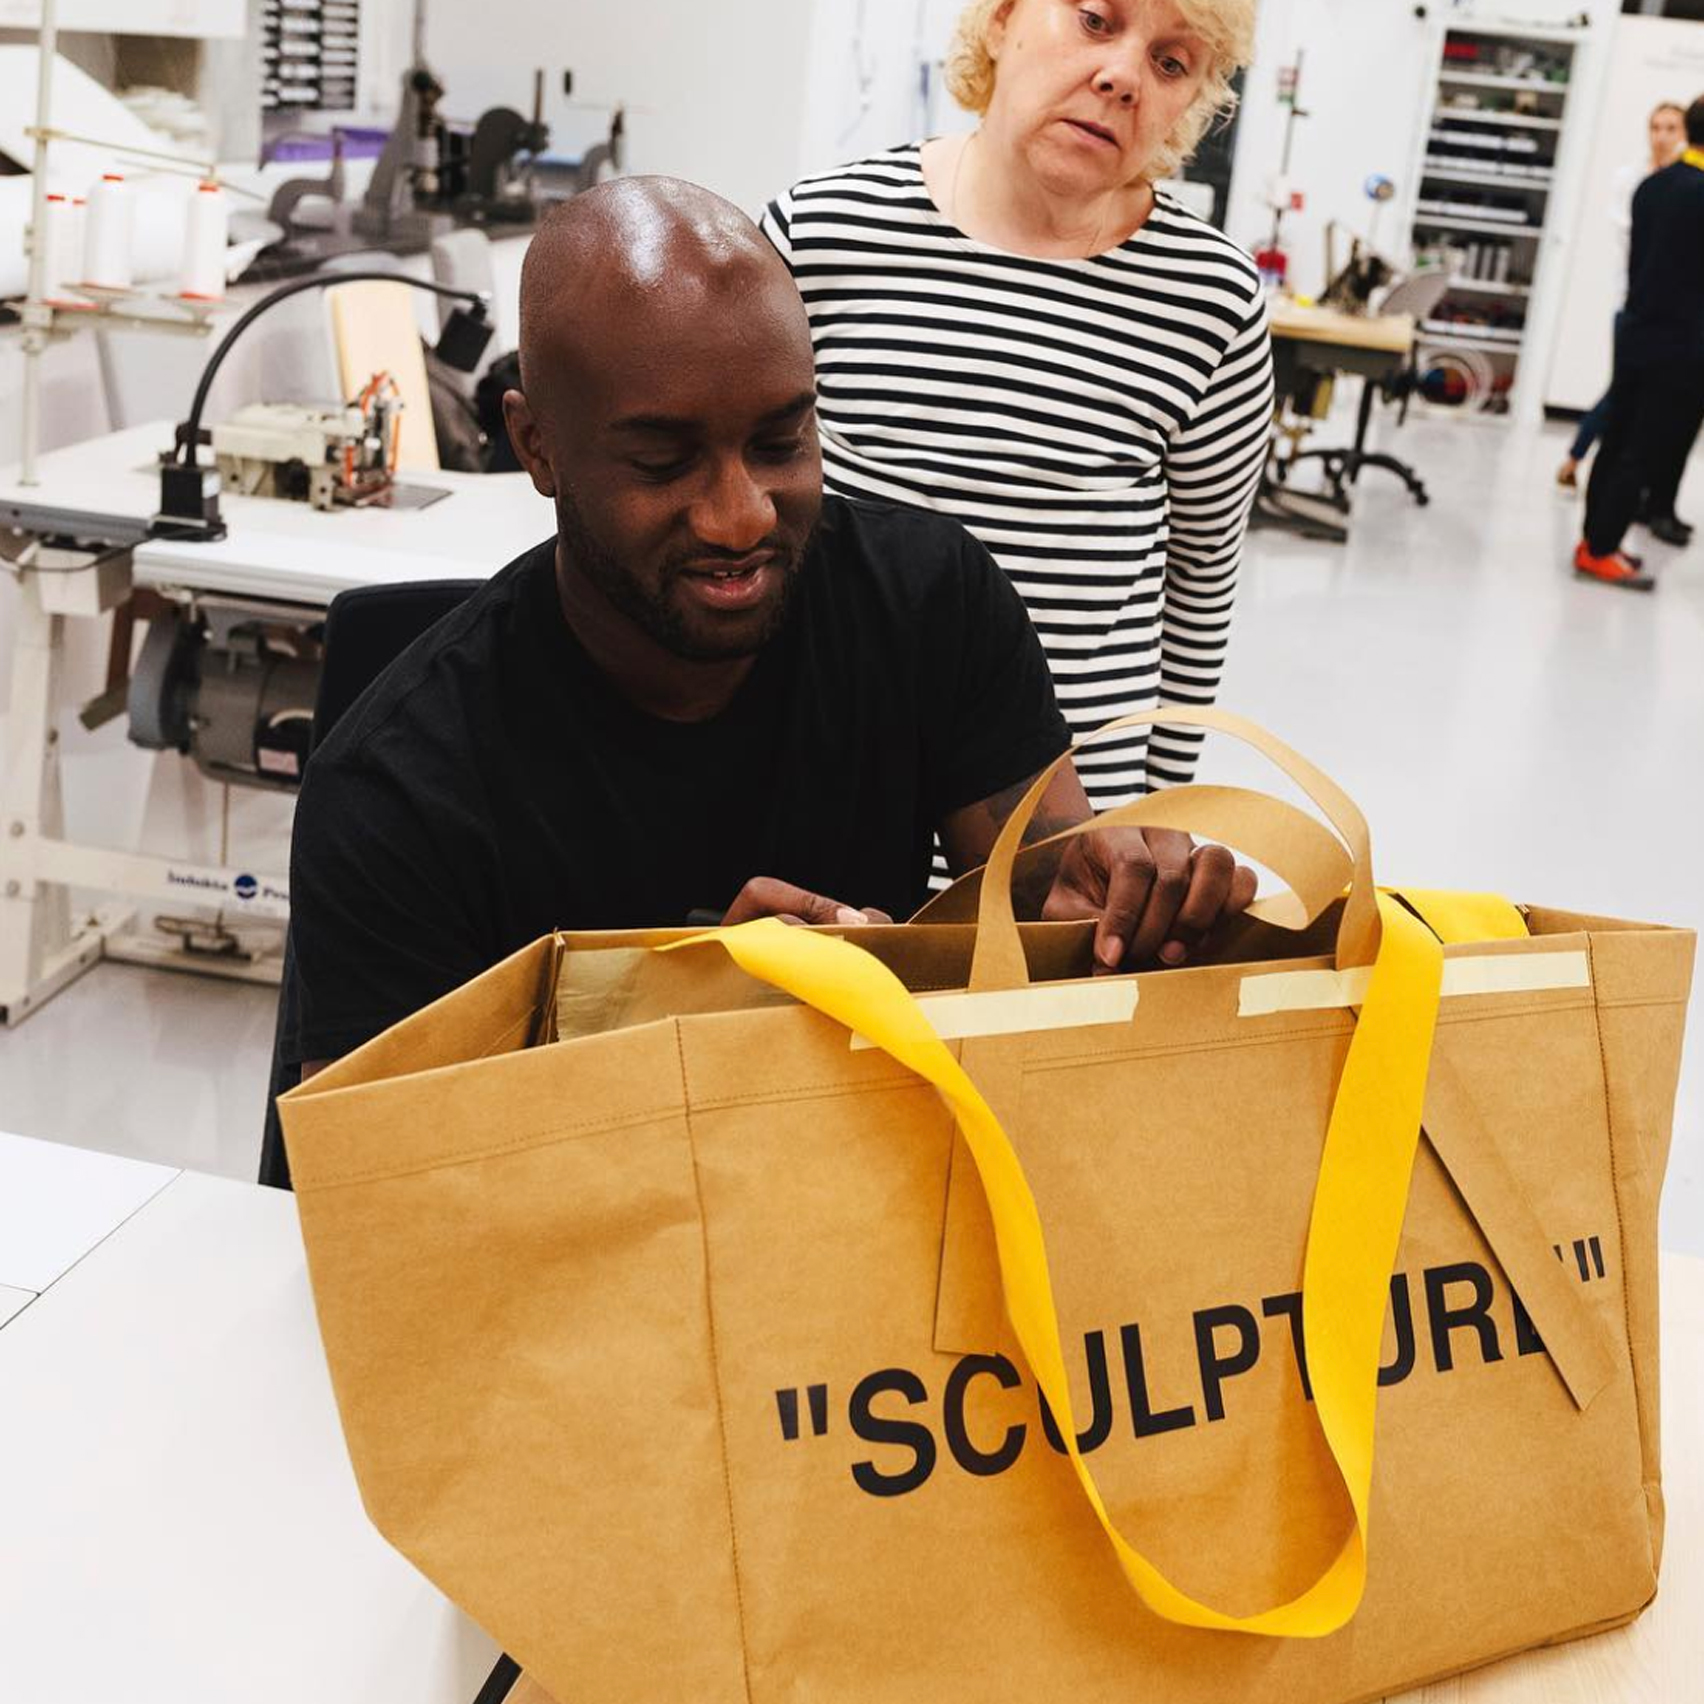 Ikea invites people to “try on” Virgil Abloh furniture collection at LFW